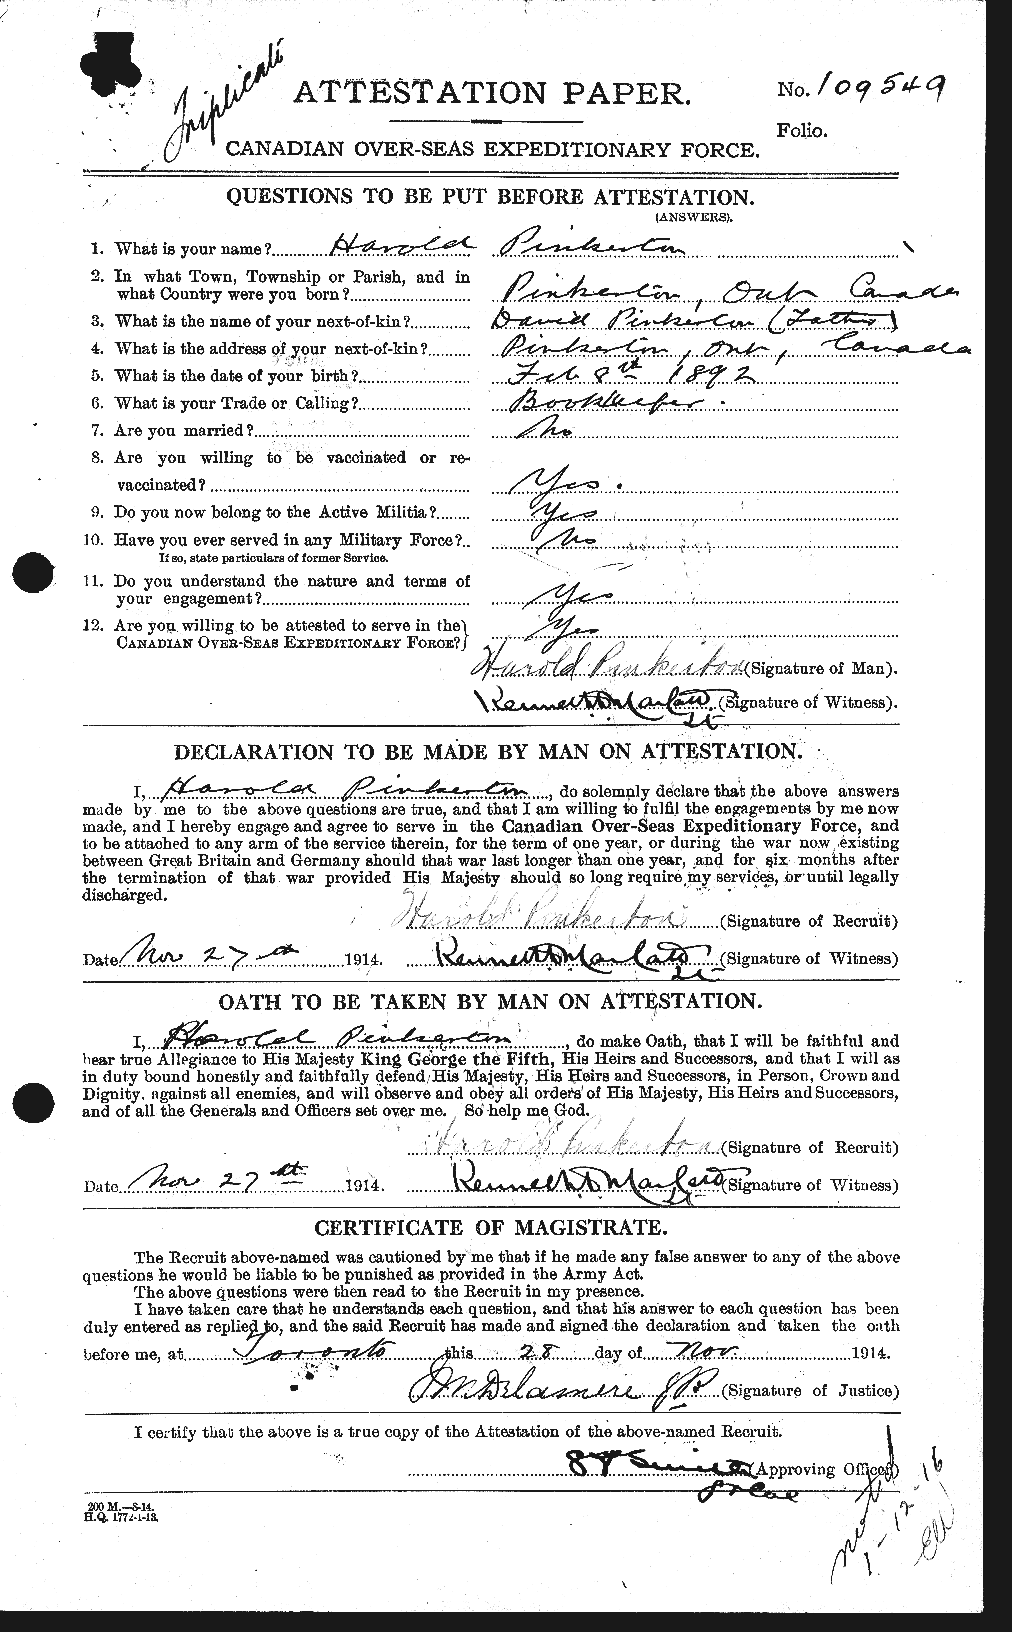 Personnel Records of the First World War - CEF 582638a